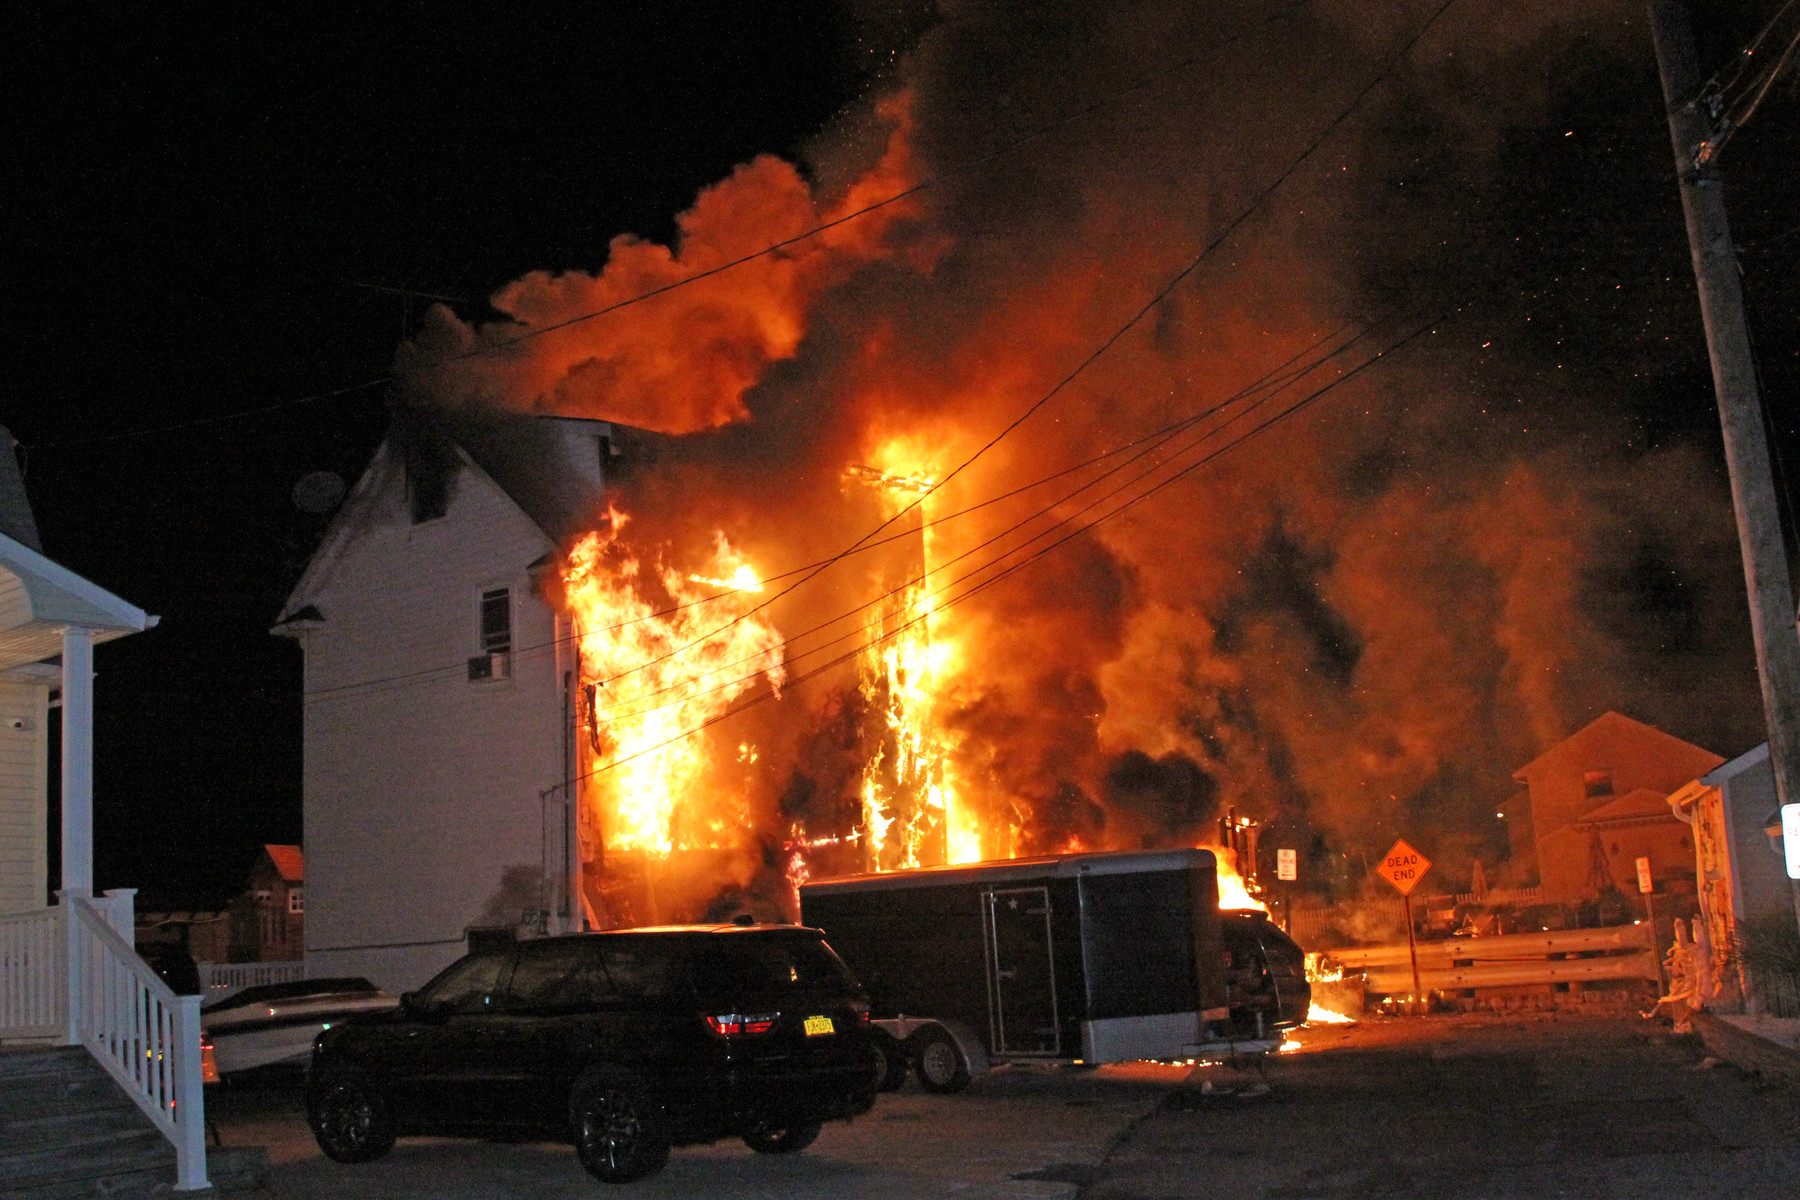 Fire destroyed a home on South Street in Seaford on Aug. 7.